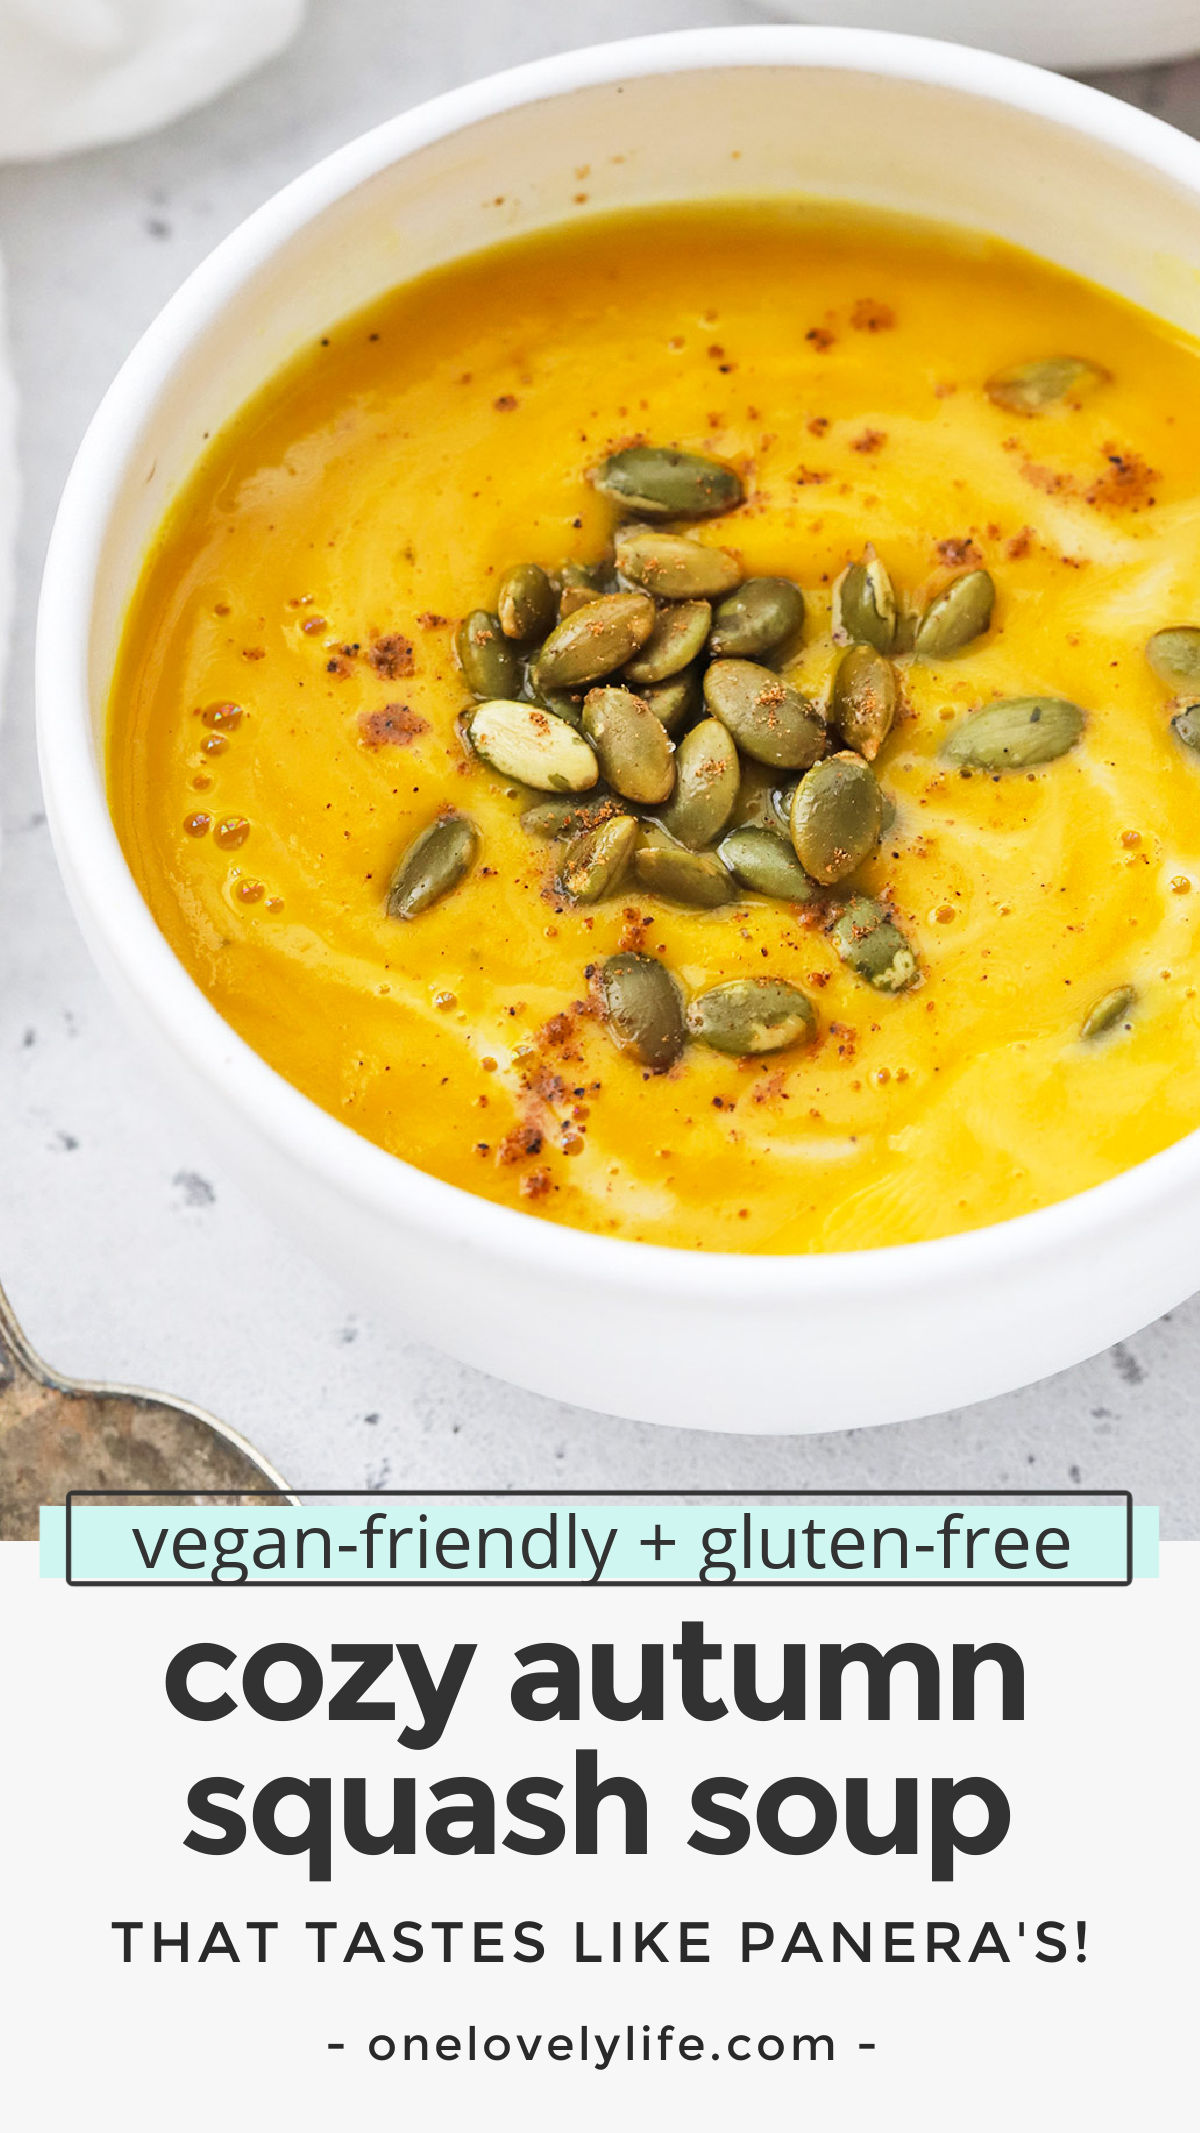 Autumn Squash Soup - We recreated the Panera squash soup recipe so you can make it at home! This creamy squash soup has the perfect blend of spices and is sure to warm you up on a chilly day. (Paleo, Vegan-Friendly) // Panera Autumn Squash Soup recipe // fall squash soup recipe // vegetarian squash soup // #squashsoup #squash #glutenfree #paleo #dairyfree #vegetarian